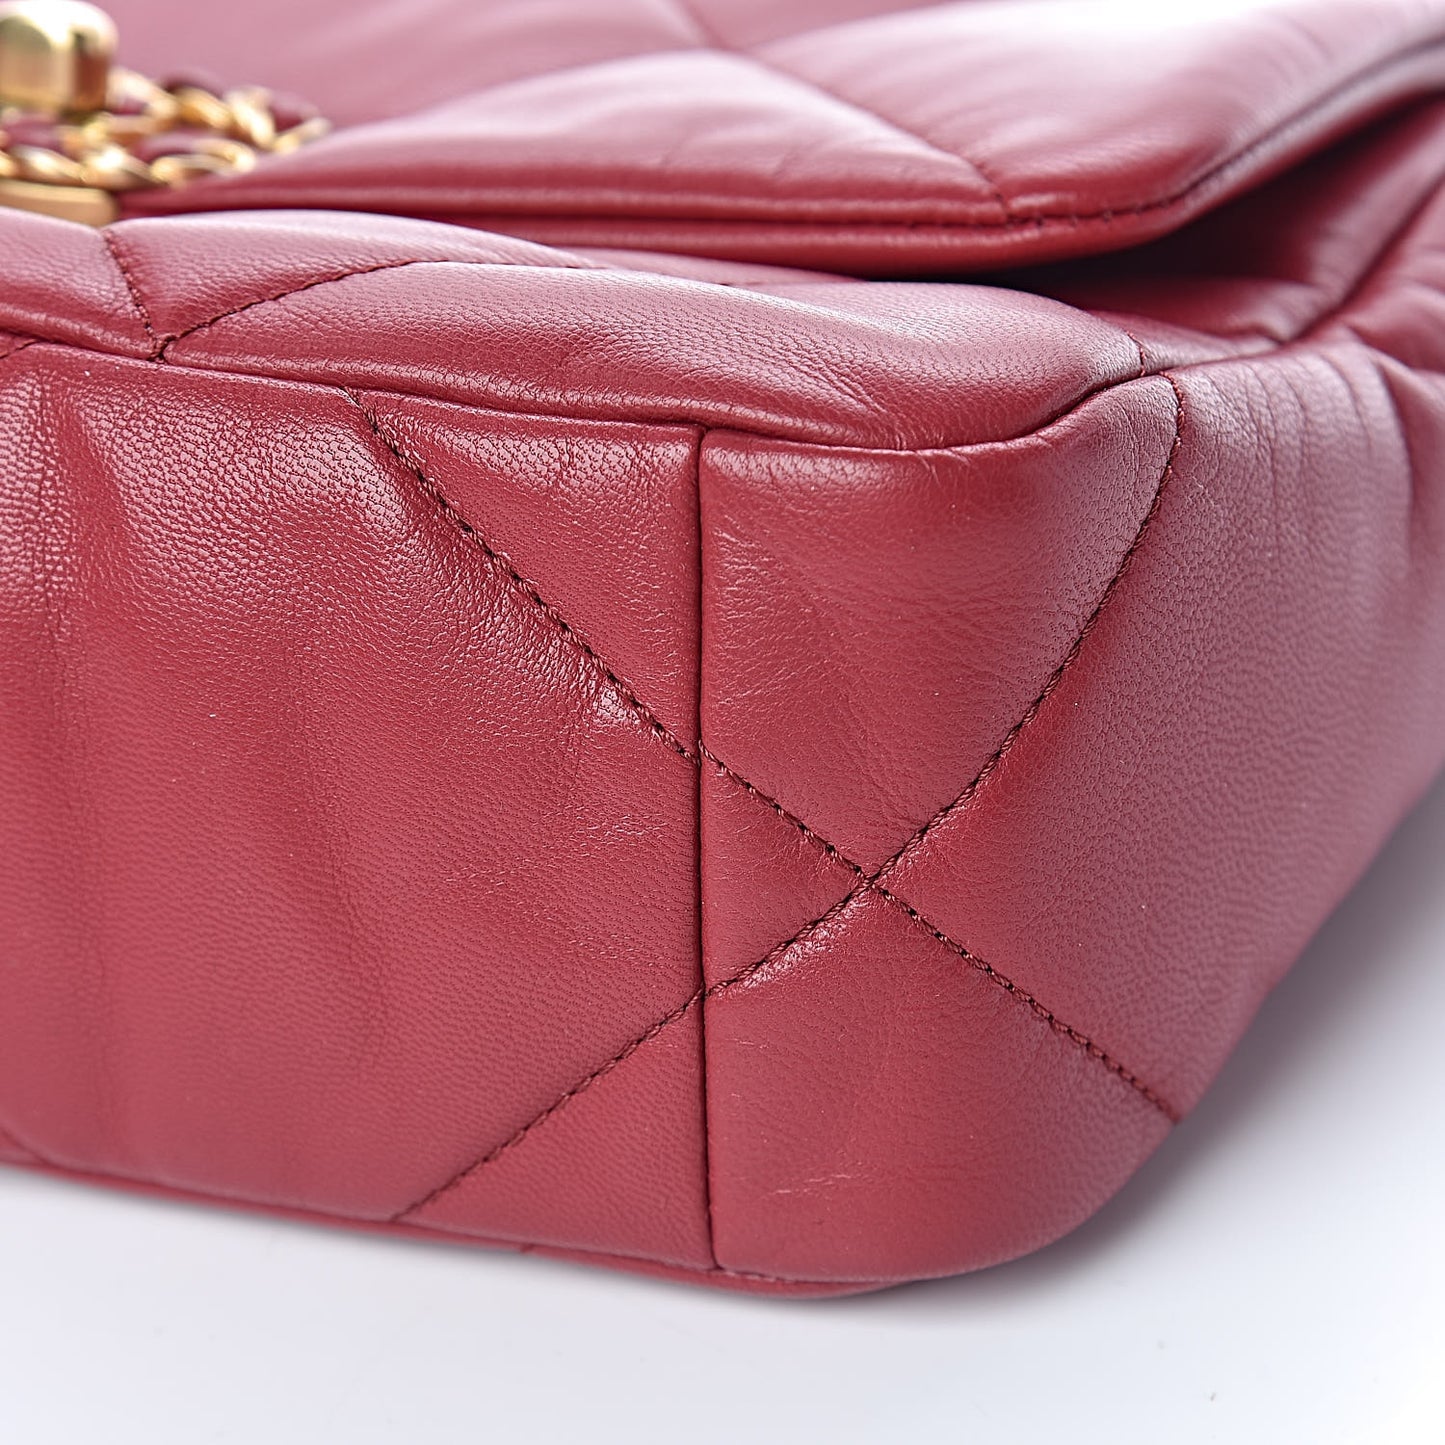 Lambskin Quilted Medium Chanel 19 Flap Red